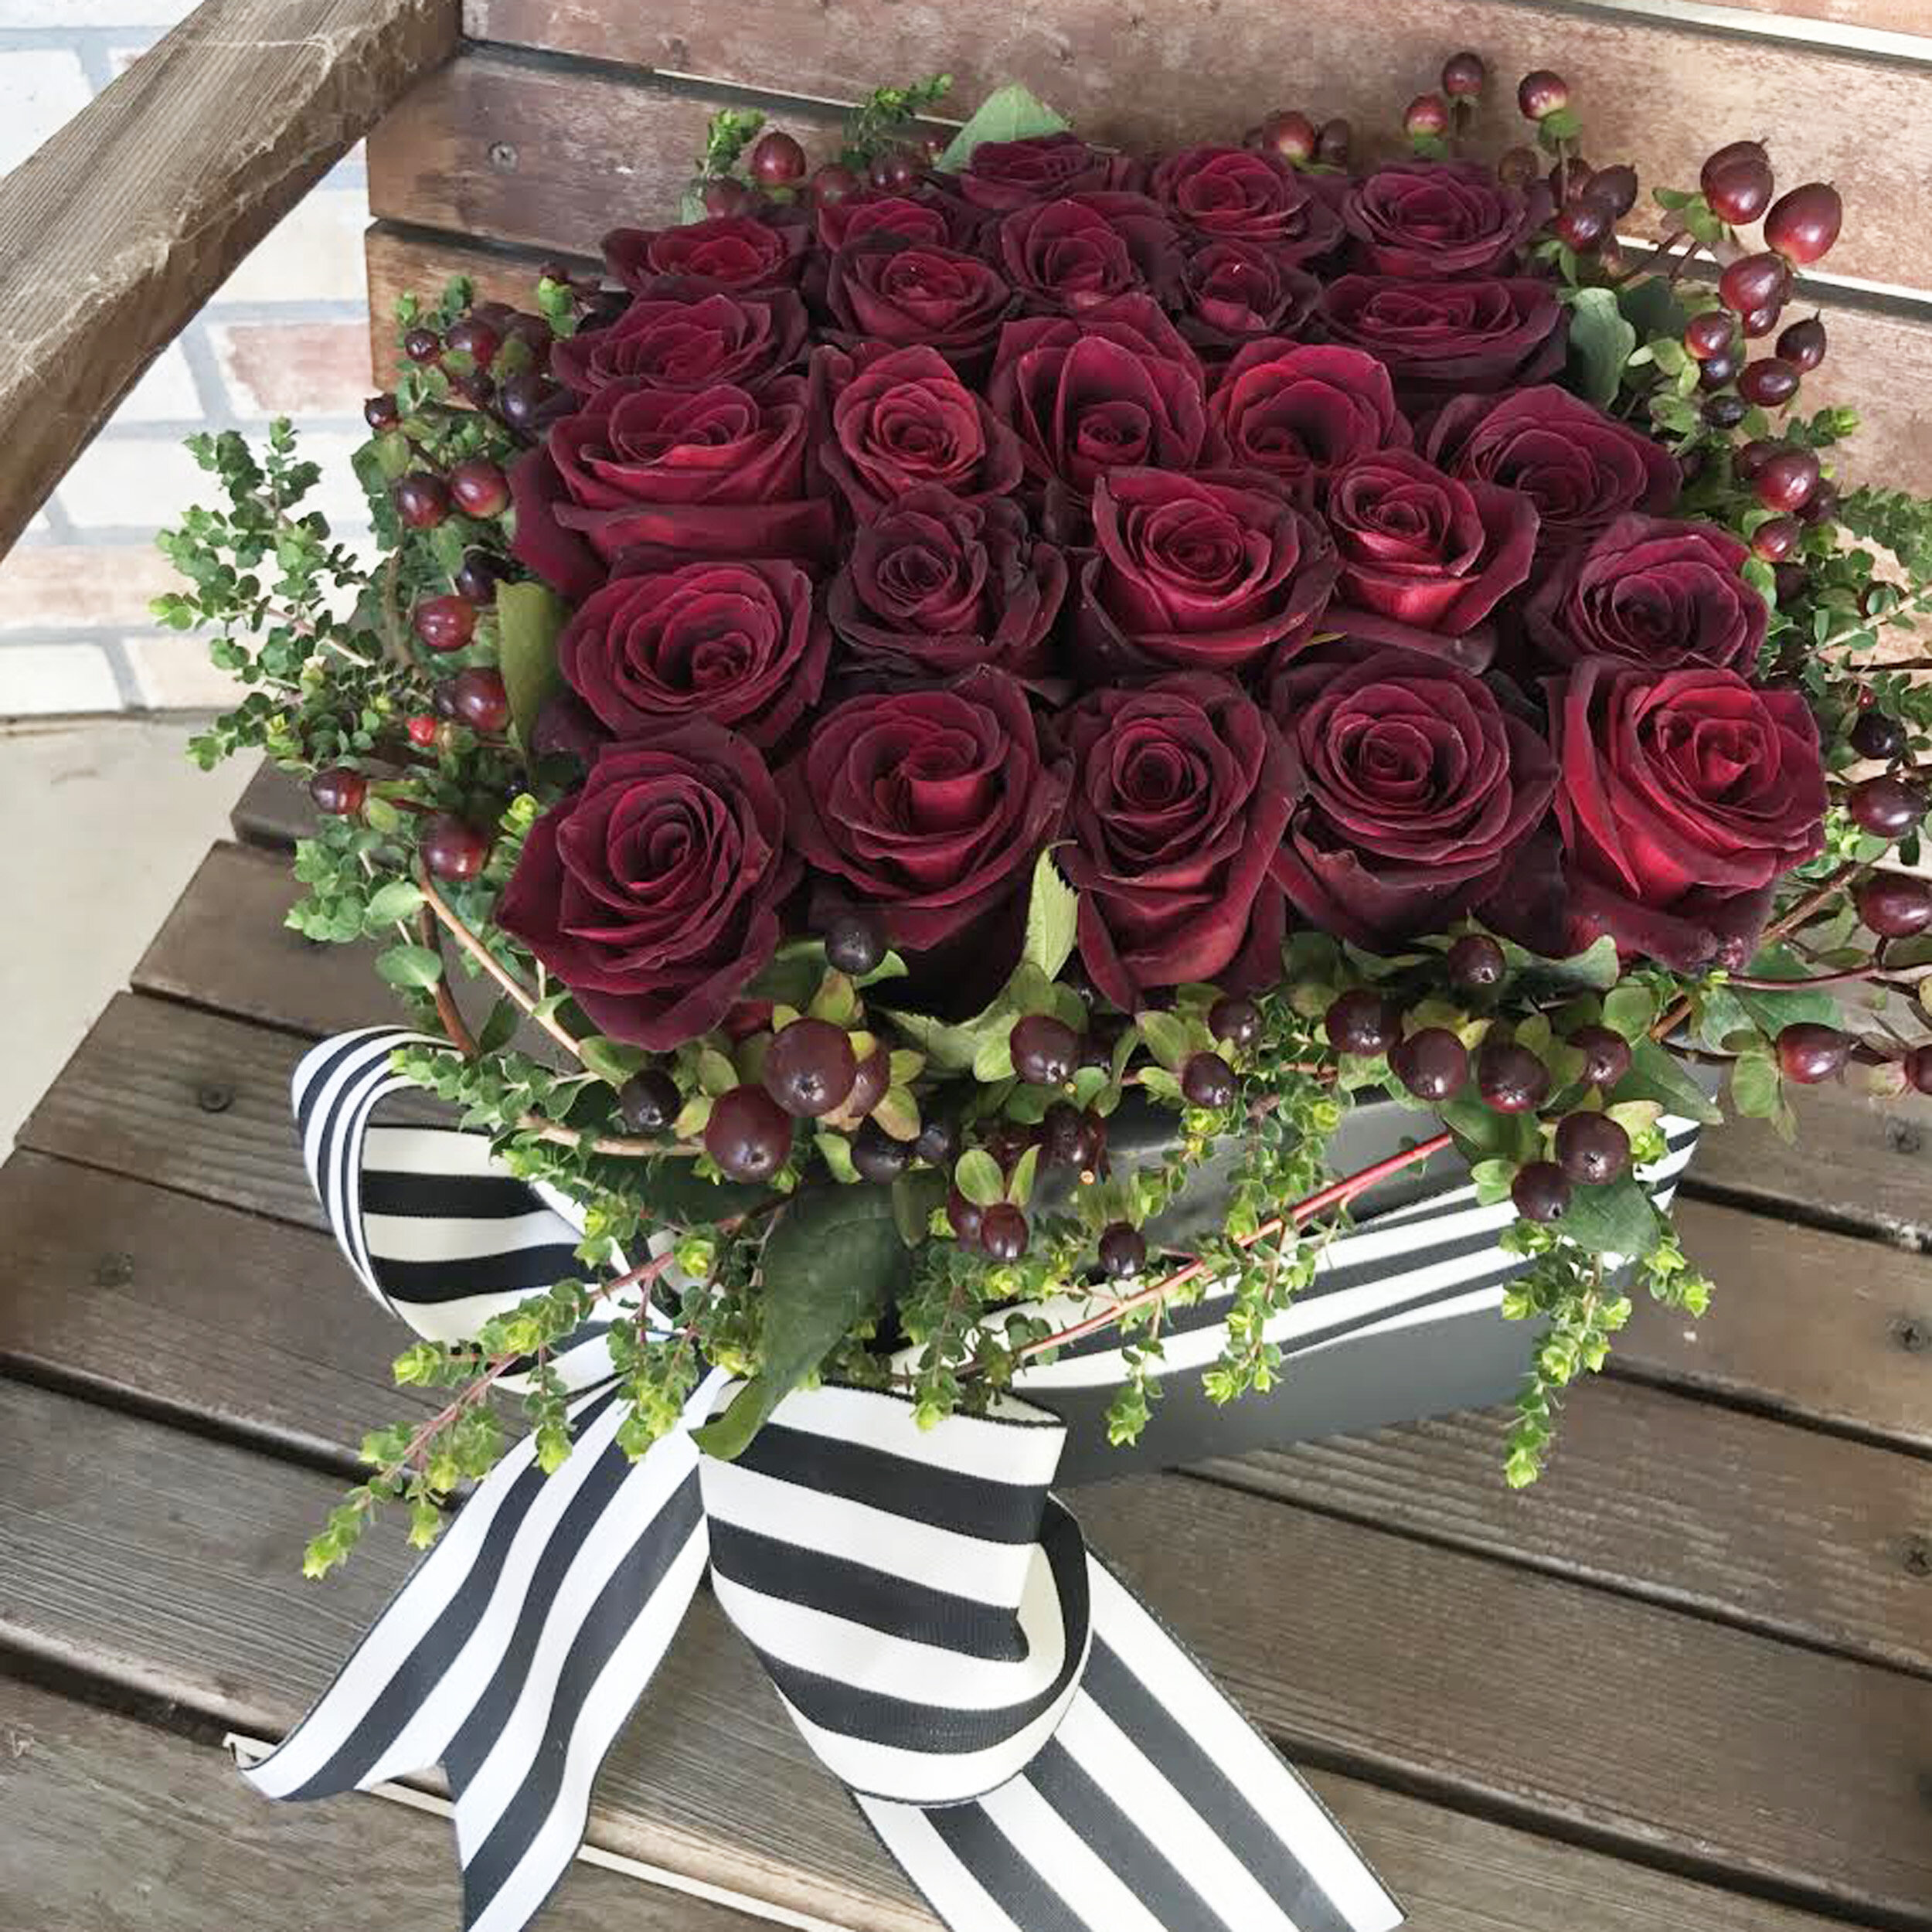 red roses for delivery in denver metro area.jpg